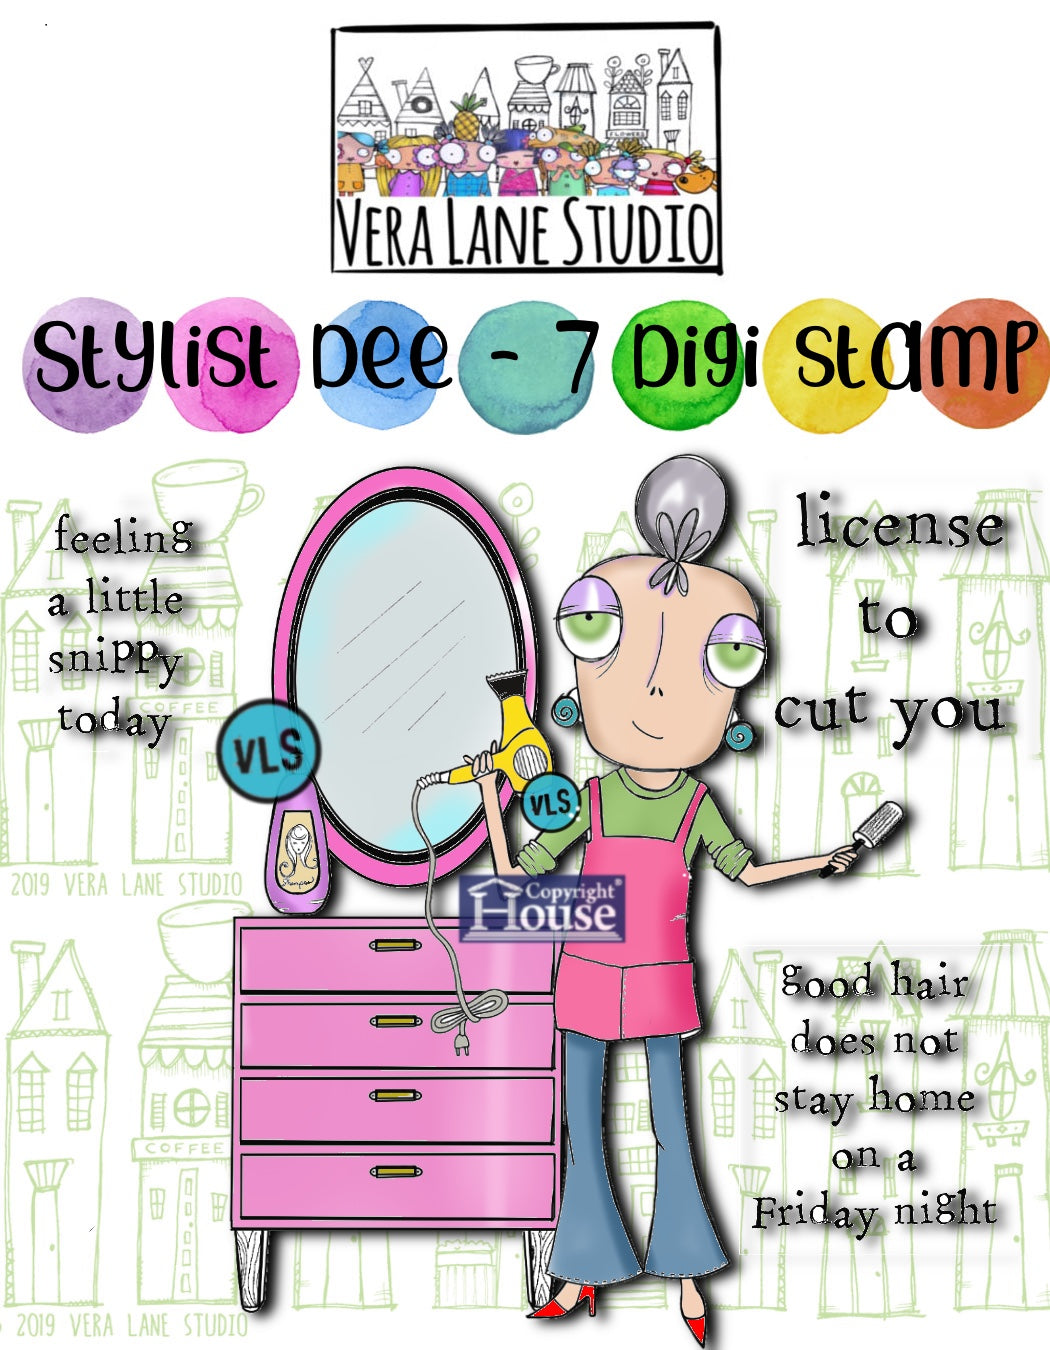 Stylist Dee - 7 digi stamp set in JPG and PNG files